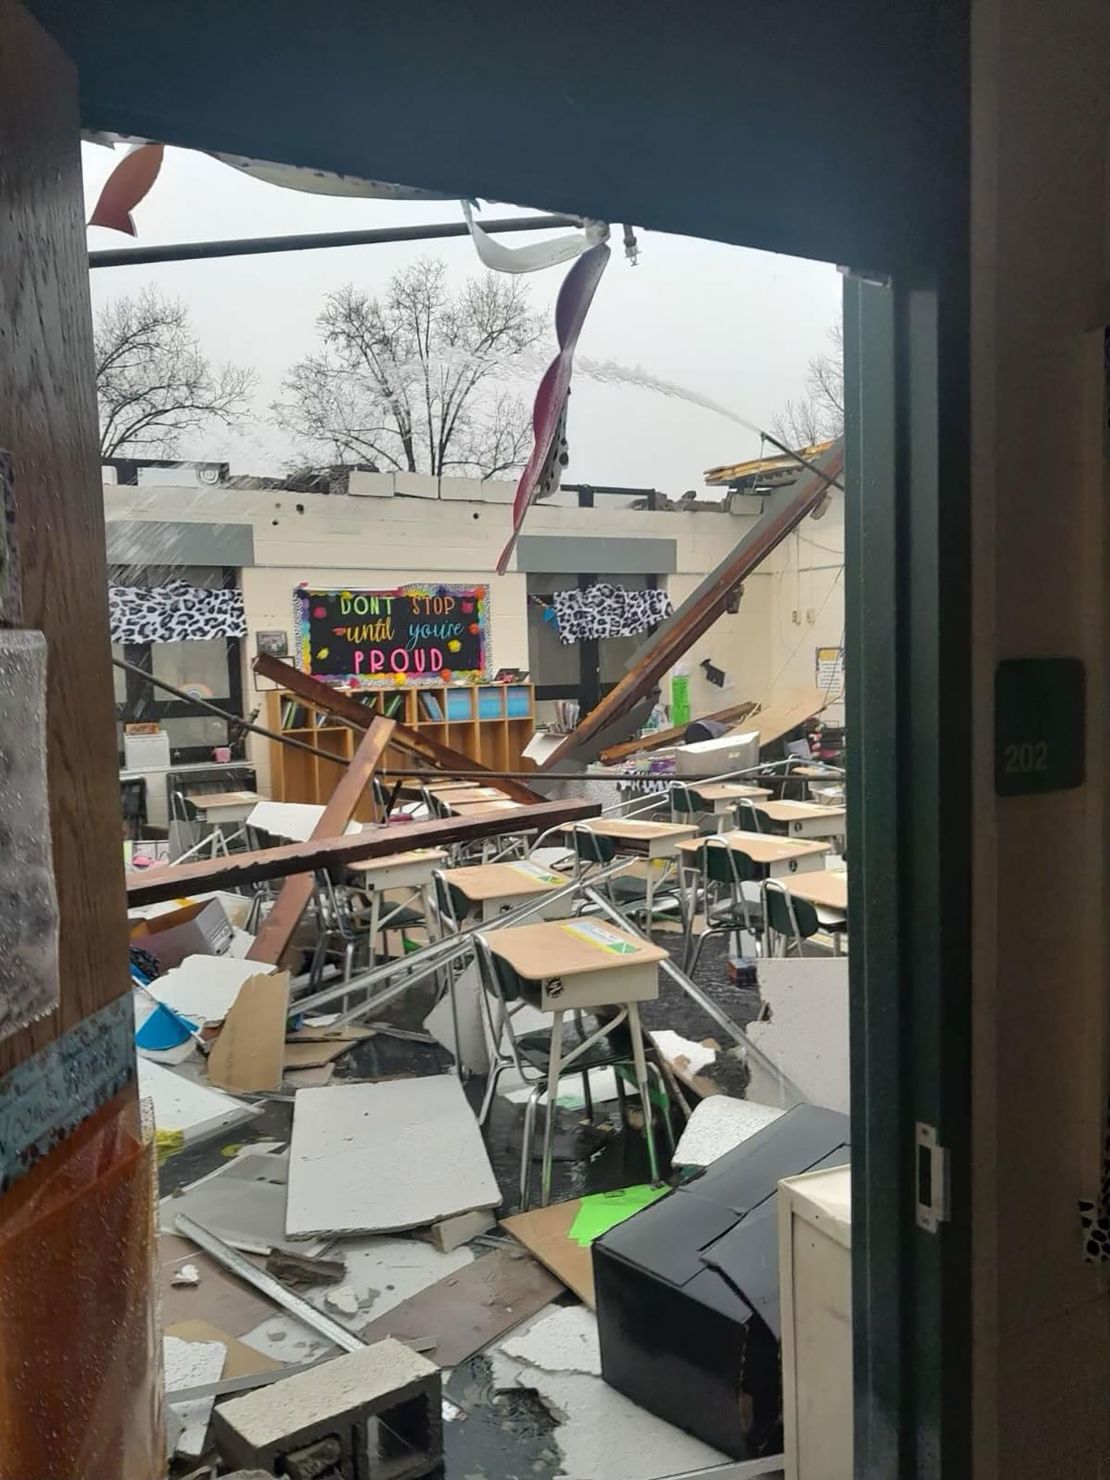 An elementary school in Proctorville, Ohio, was left in shambles after severe storms hit the area on Tuesday.